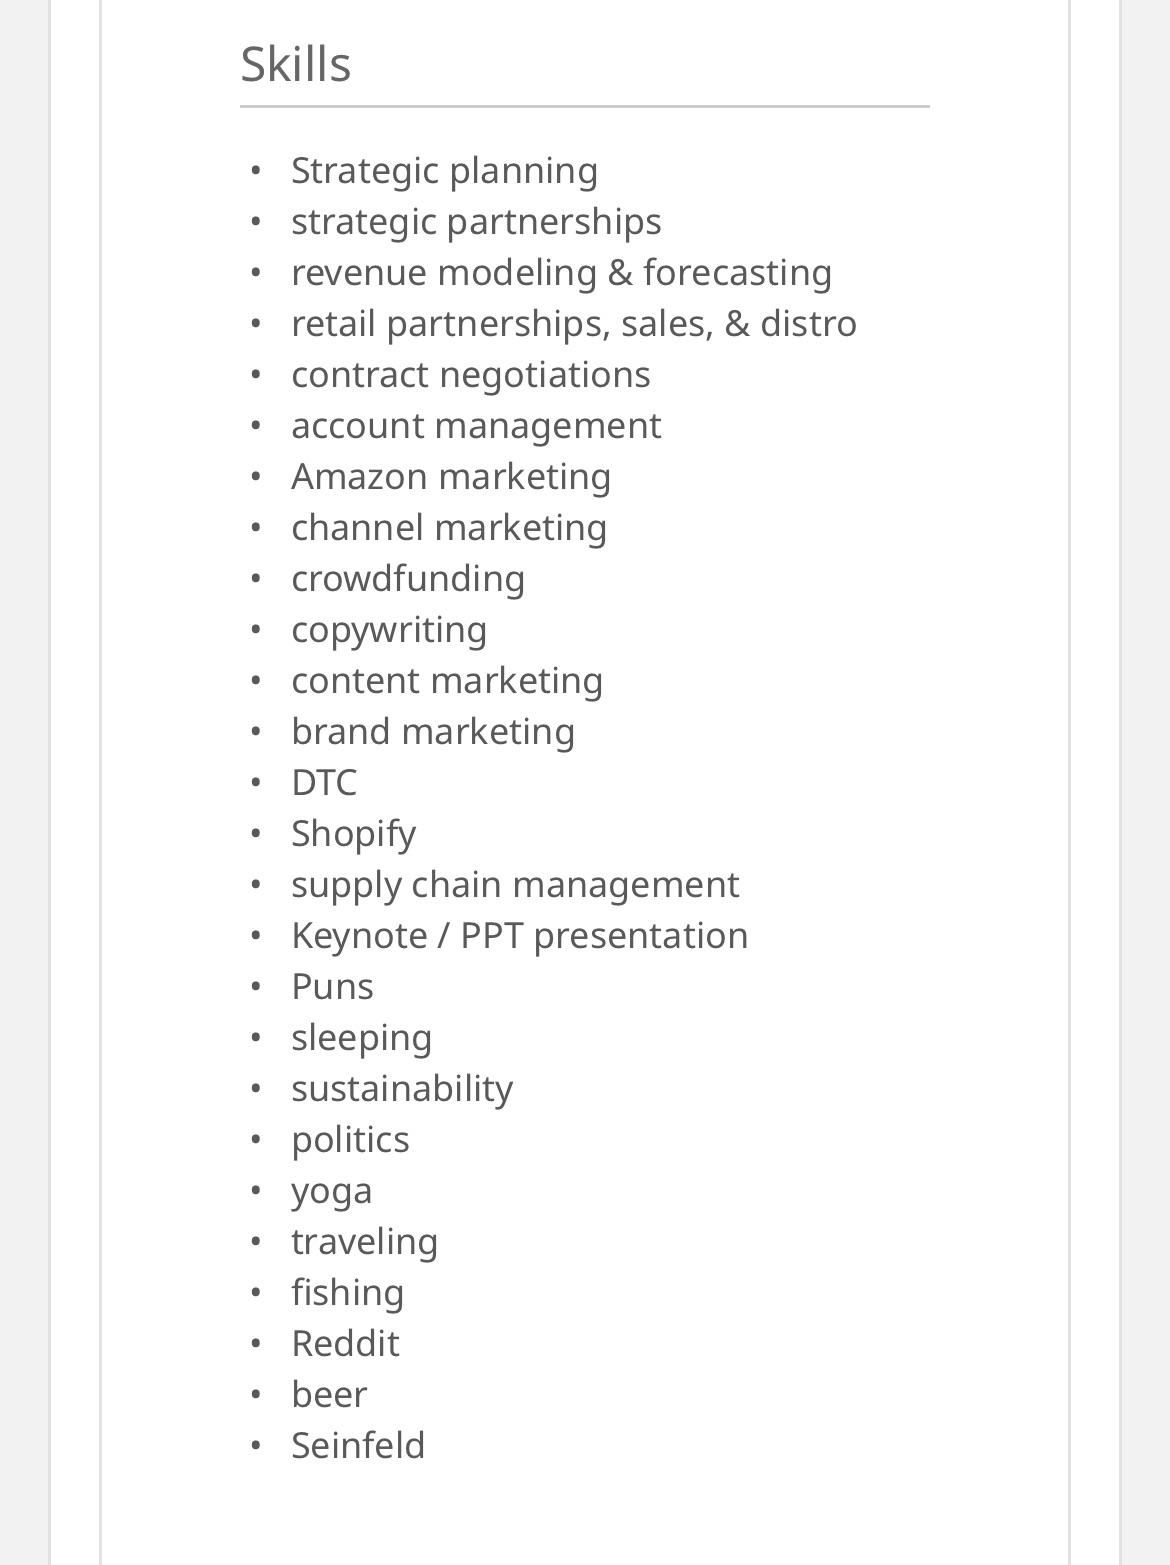 List of skills on a resume that was sent to me.